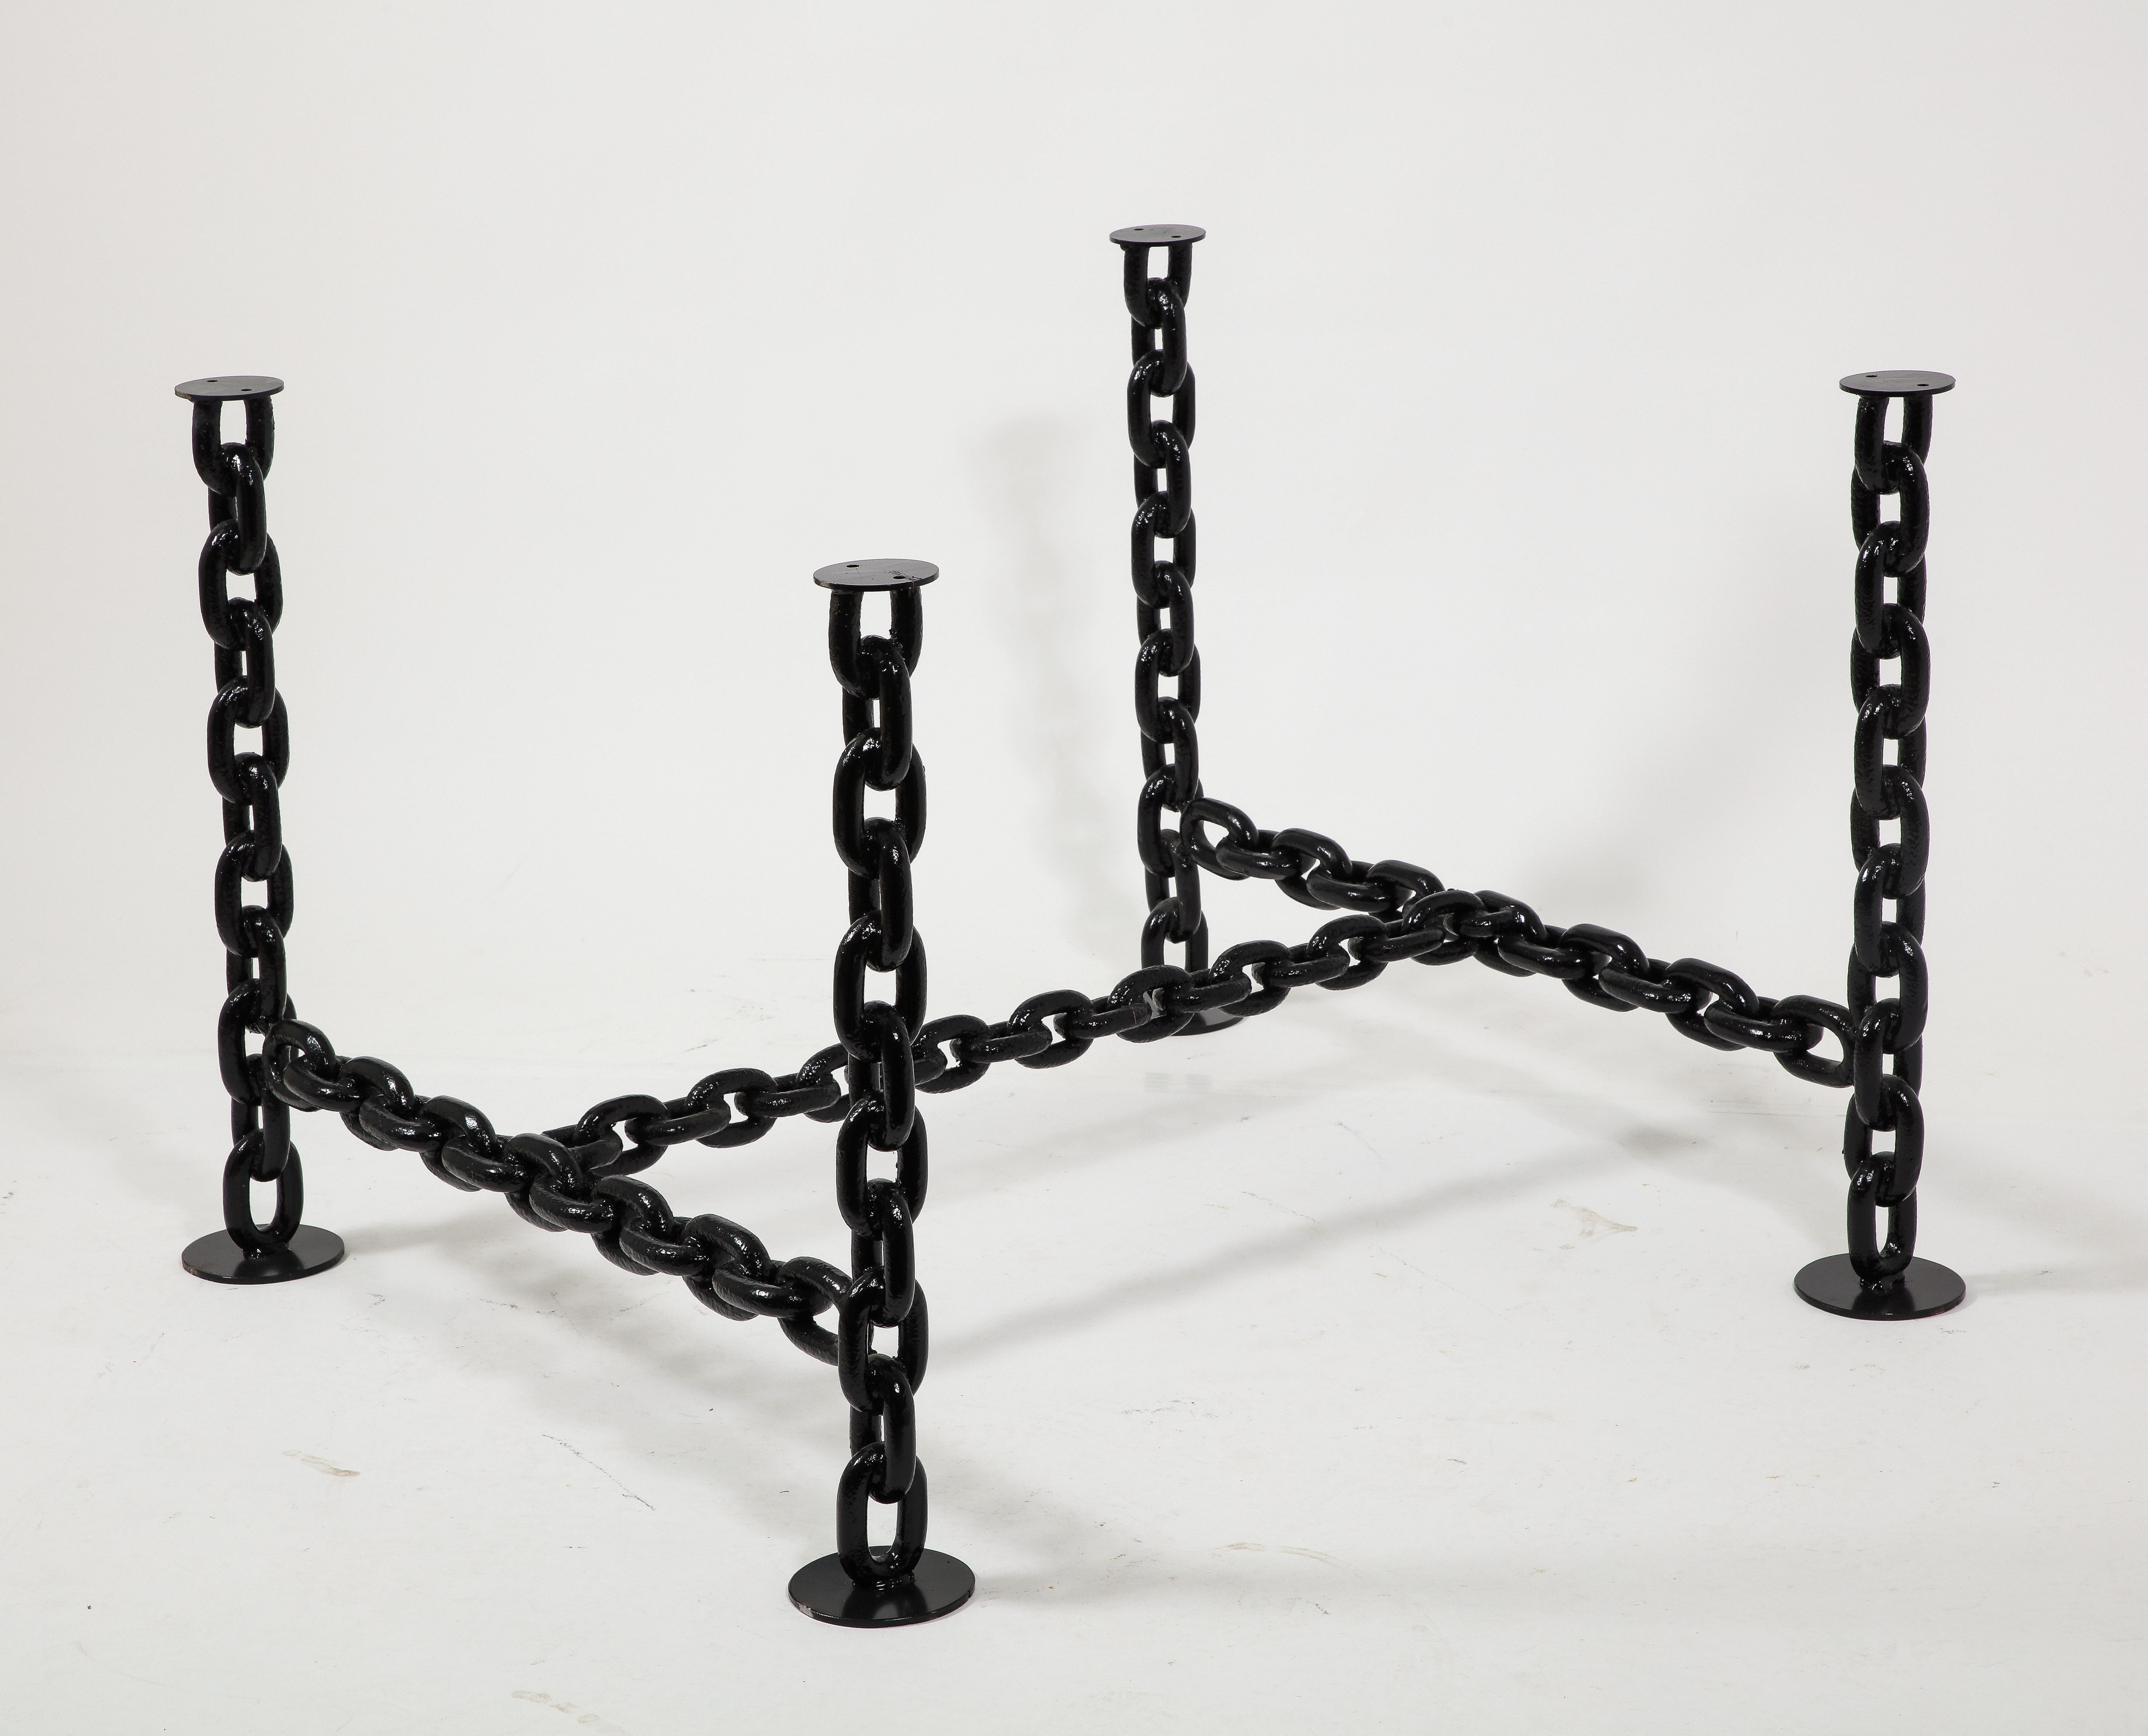 Black Lacquered Brutalist Marine Chains Dining Table Structure - France 1970s For Sale 1